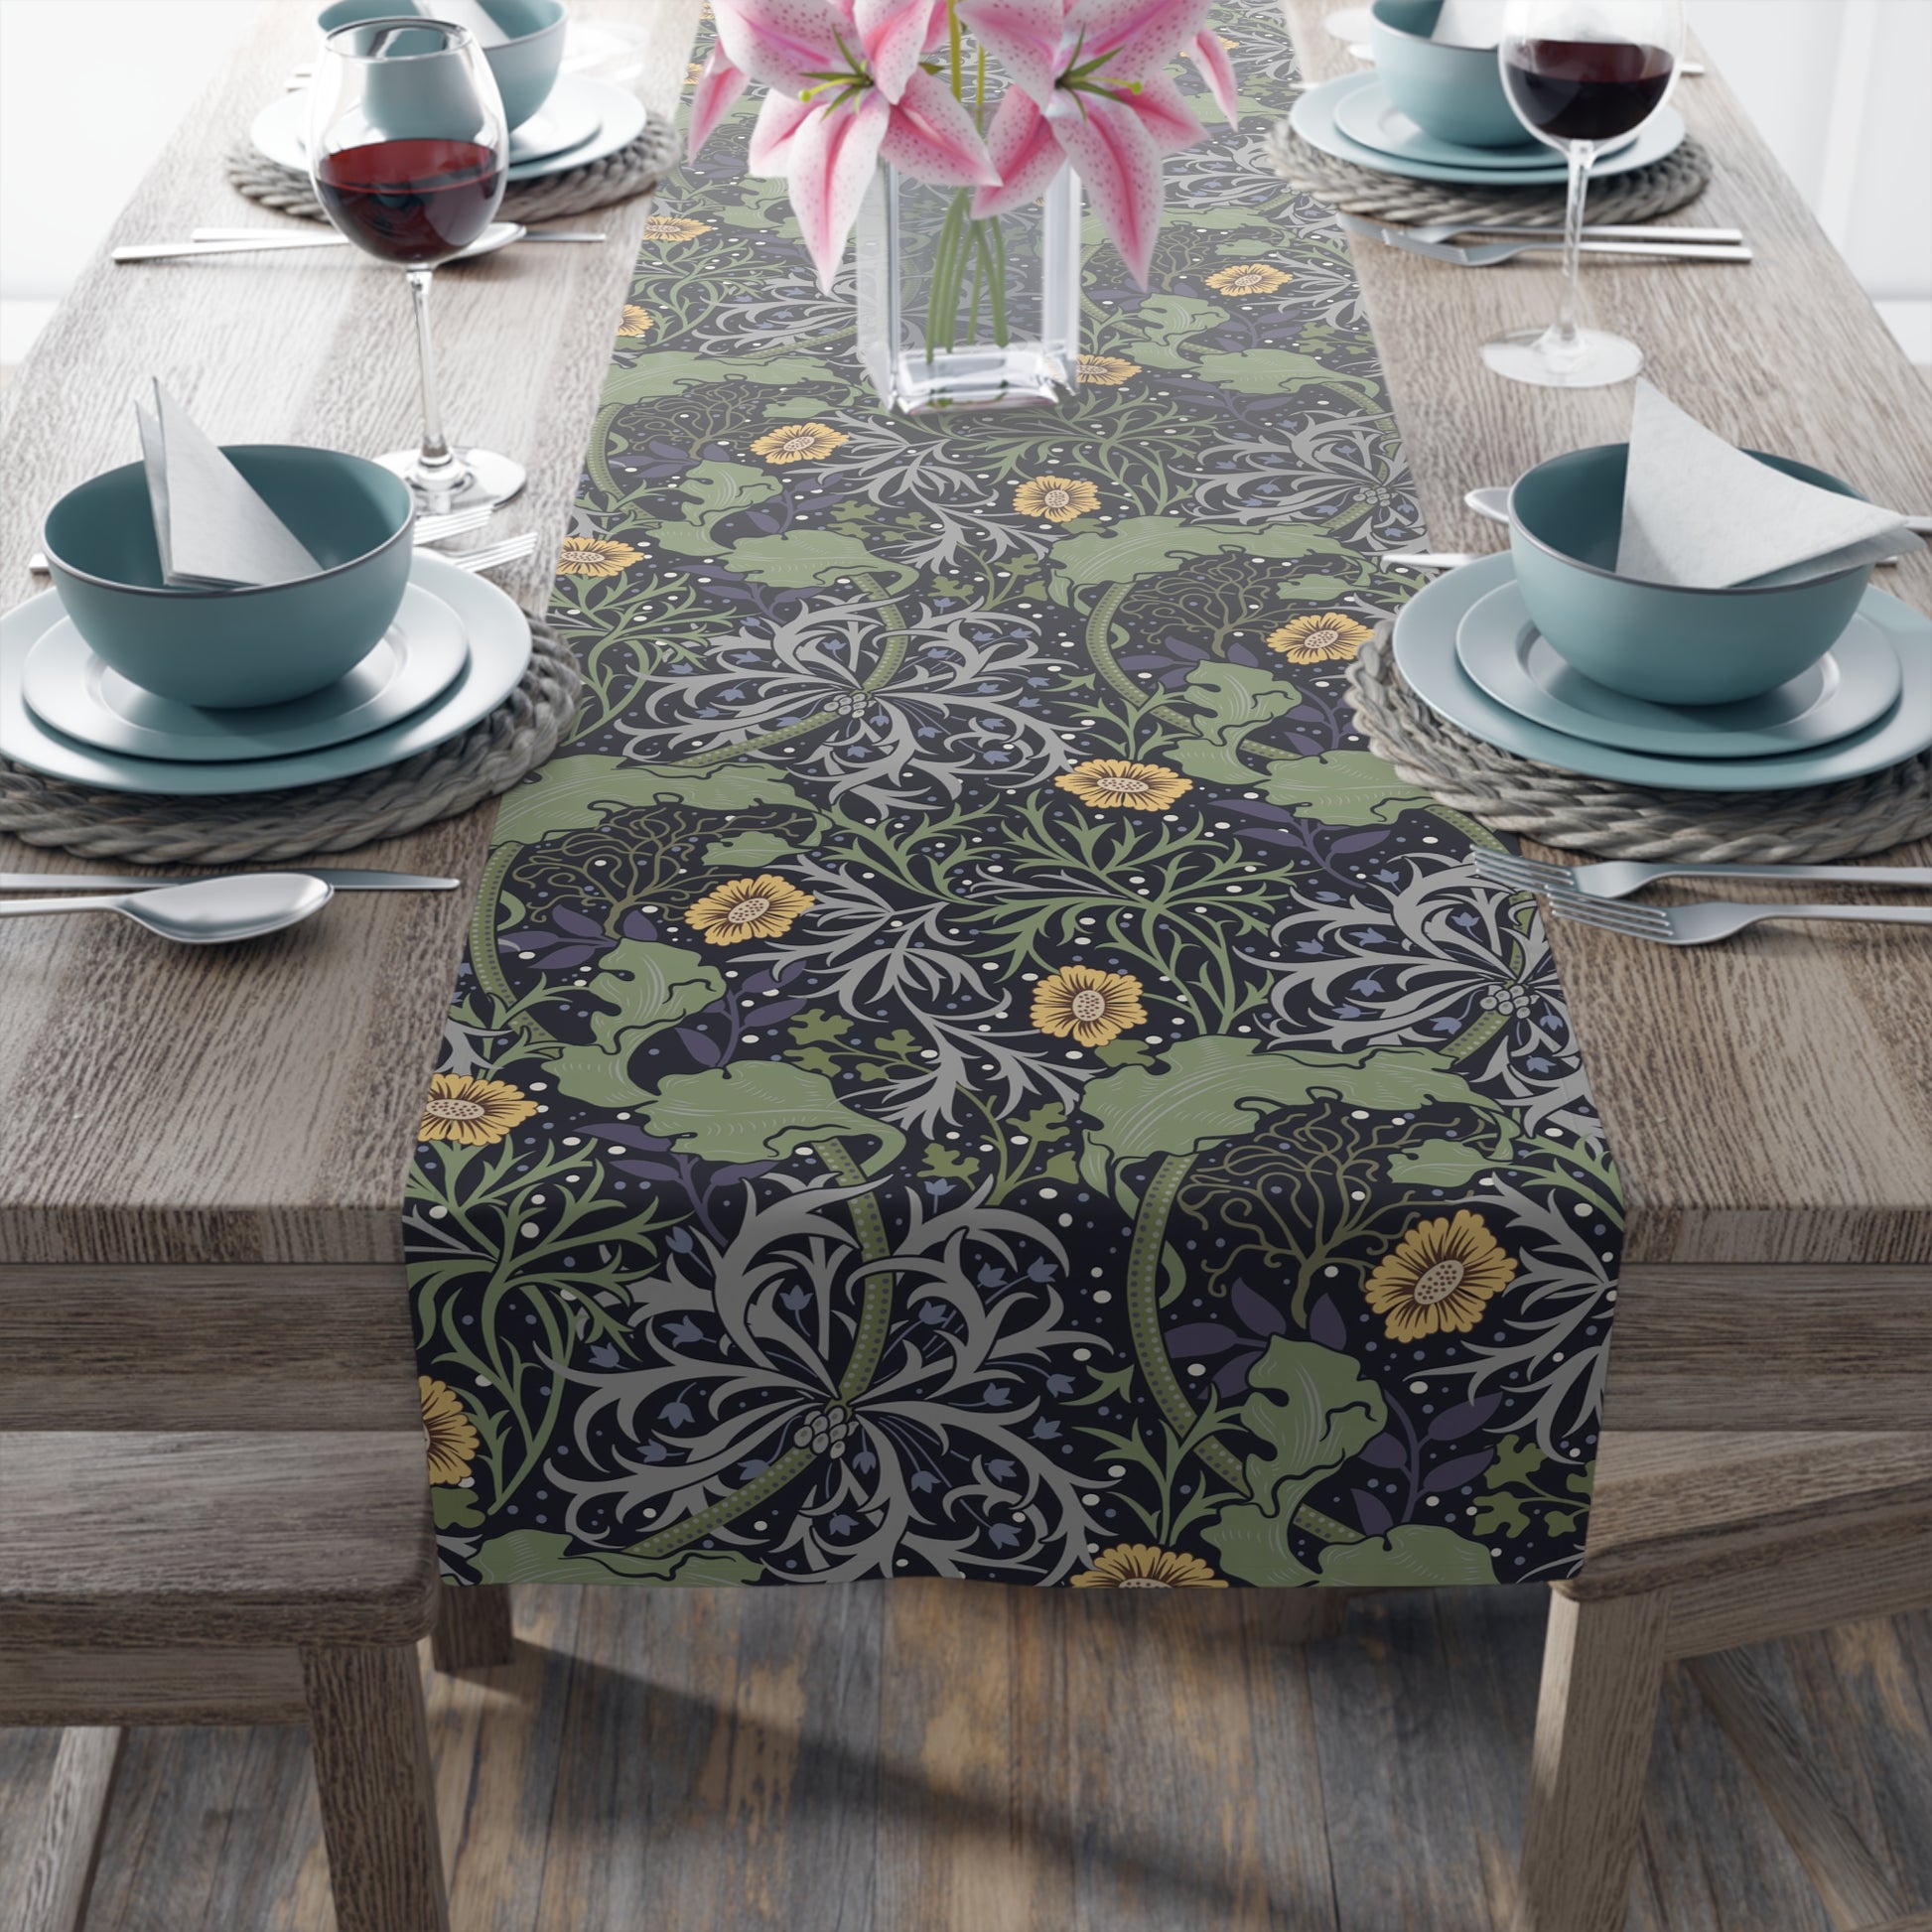 william-morris-co-table-runner-seaweed-collection-yellow-flower-4